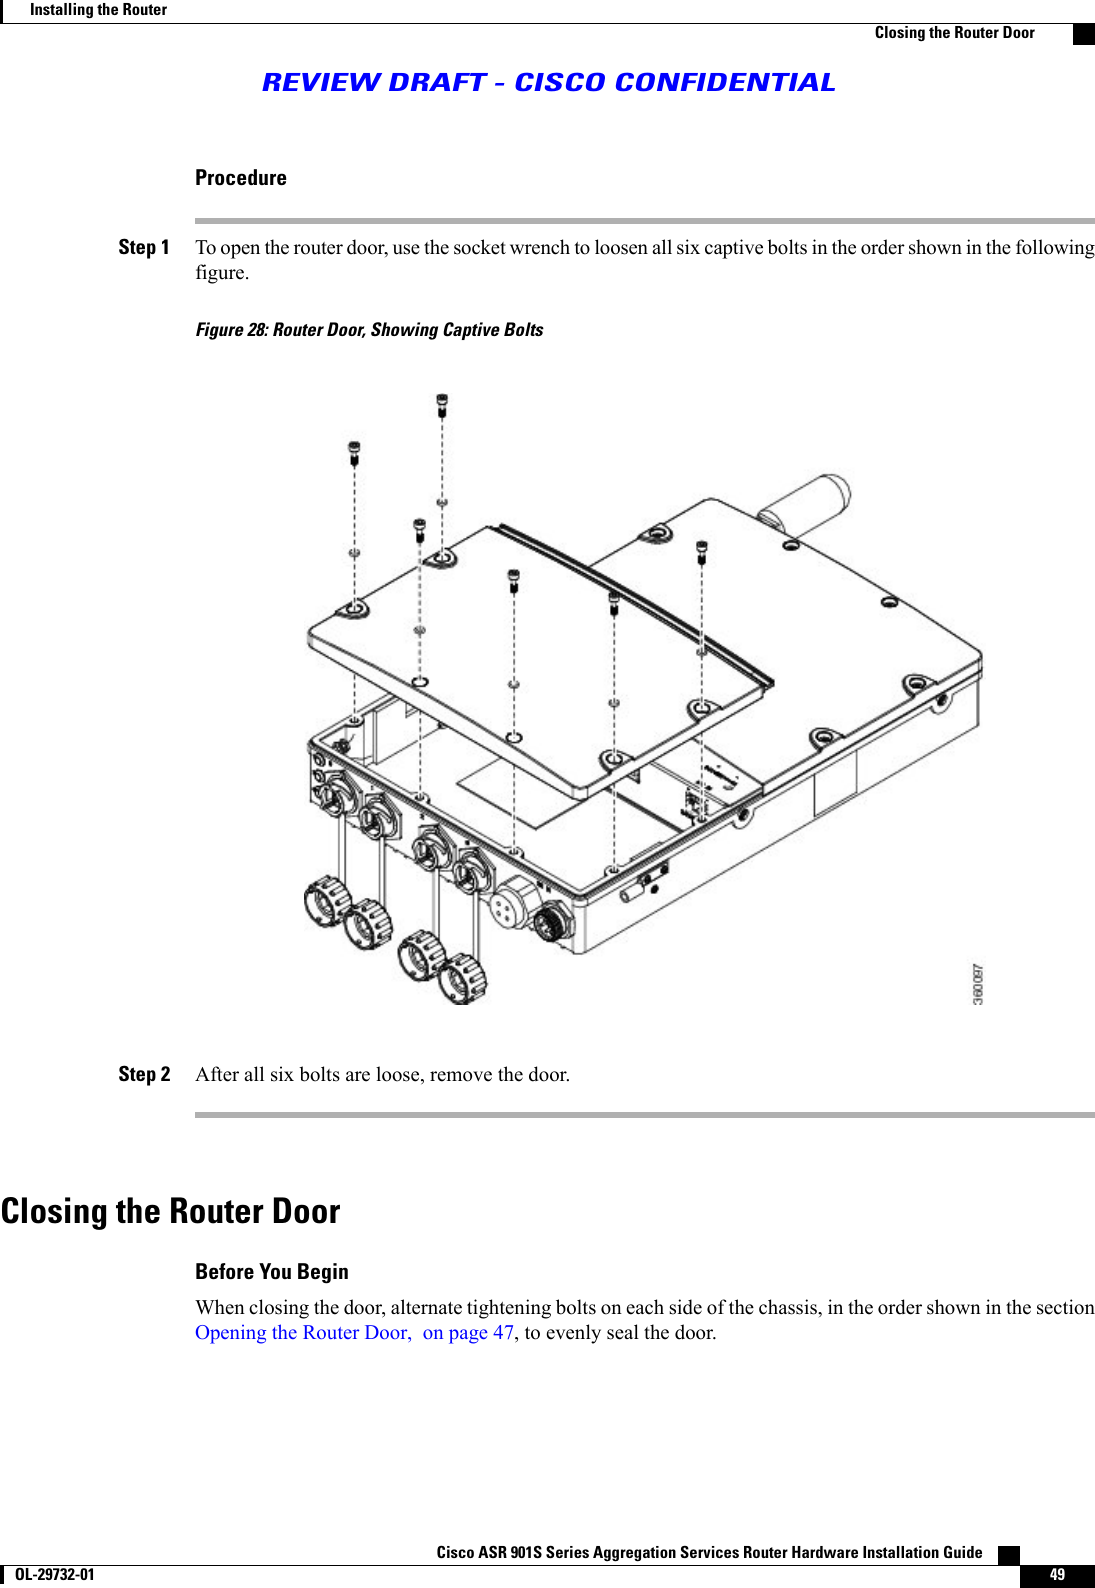 ProcedureStep 1 To open the router door, use the socket wrench to loosen all six captive bolts in the order shown in the followingfigure.Figure 28: Router Door, Showing Captive BoltsStep 2 After all six bolts are loose, remove the door.Closing the Router DoorBefore You BeginWhen closing the door, alternate tightening bolts on each side of the chassis, in the order shown in the sectionOpening the Router Door, on page 47, to evenly seal the door.Cisco ASR 901S Series Aggregation Services Router Hardware Installation Guide       OL-29732-01 49Installing the RouterClosing the Router DoorREVIEW DRAFT - CISCO CONFIDENTIAL